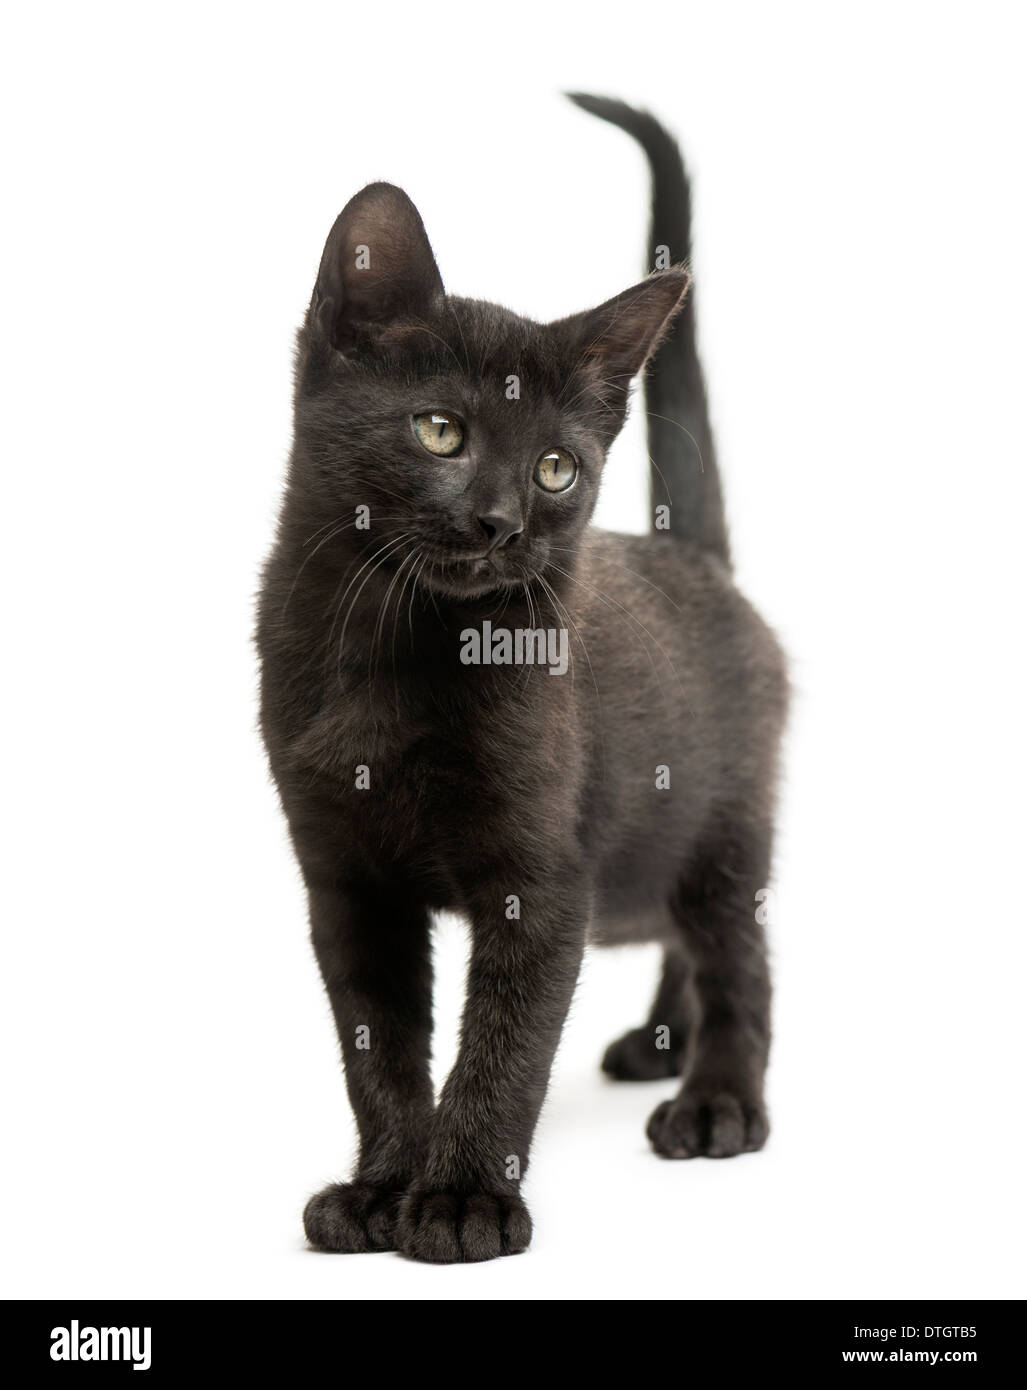 Black kitten standing, looking away, 2 months old, against white background Stock Photo